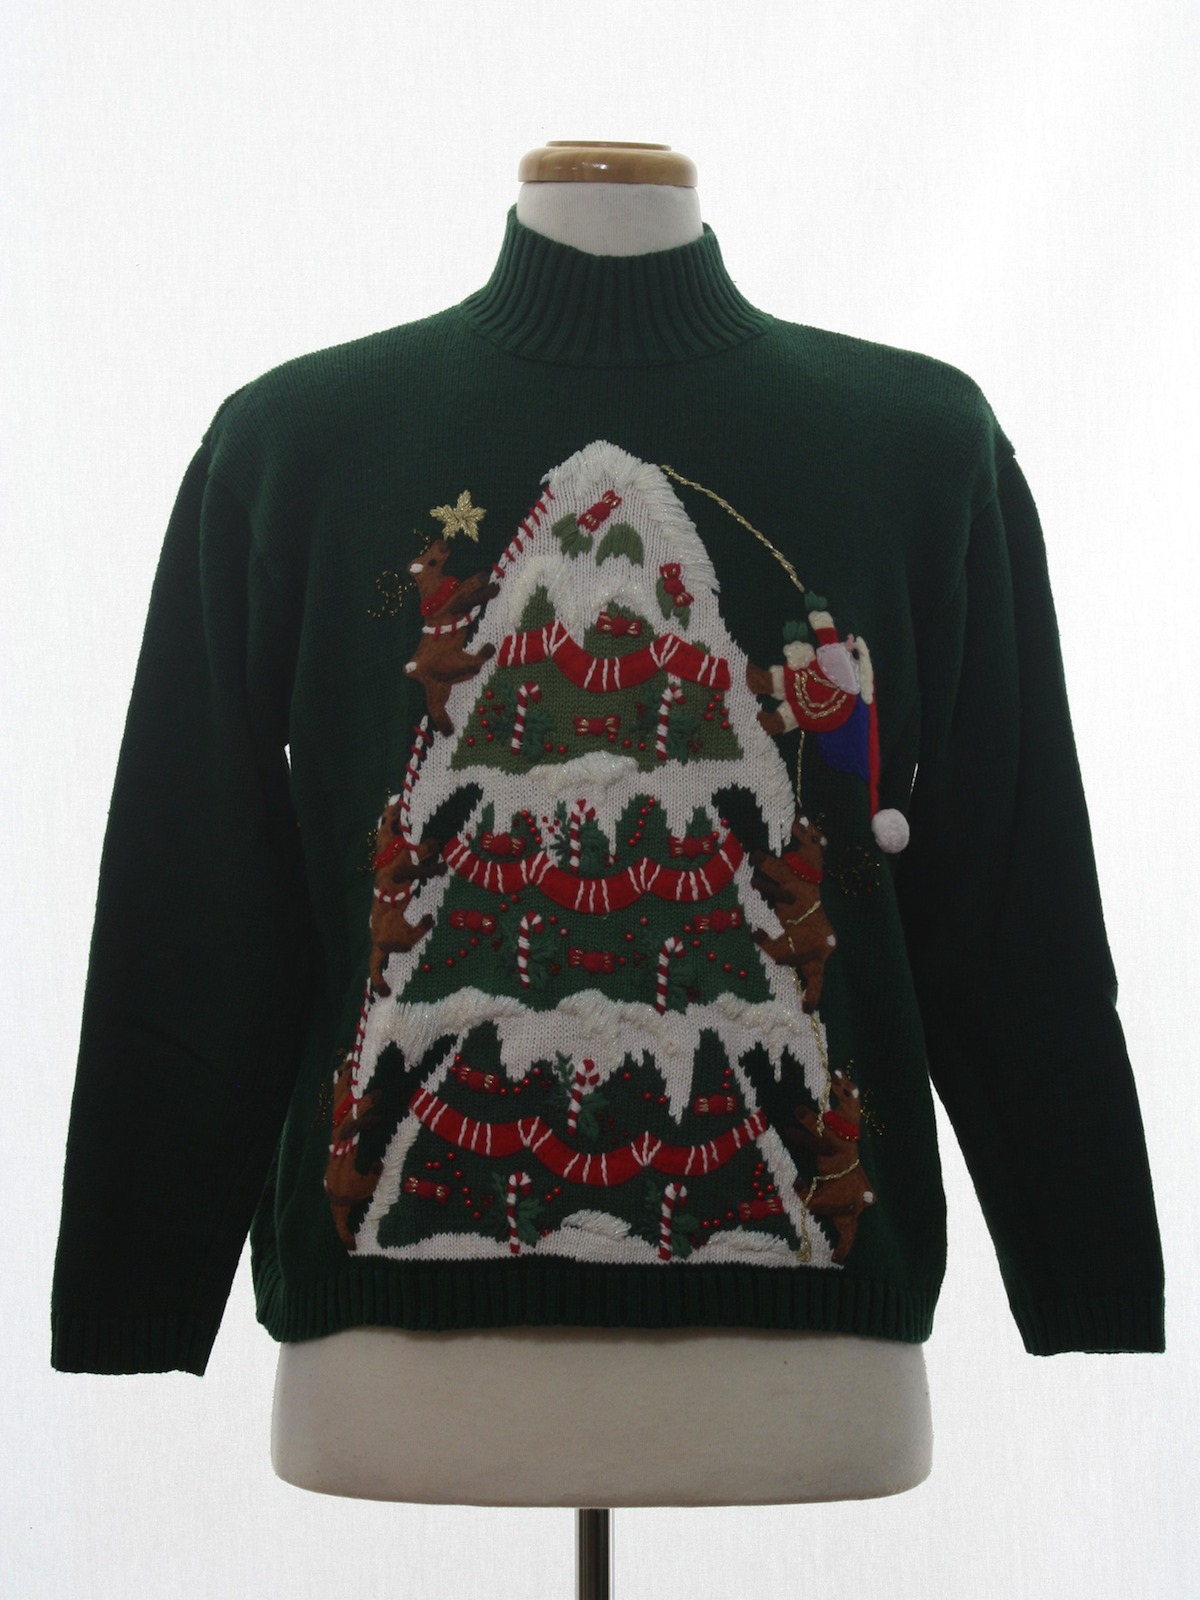 Womens Ugly Christmas Sweater: -Heirloom Collectibles- Womens dark ...